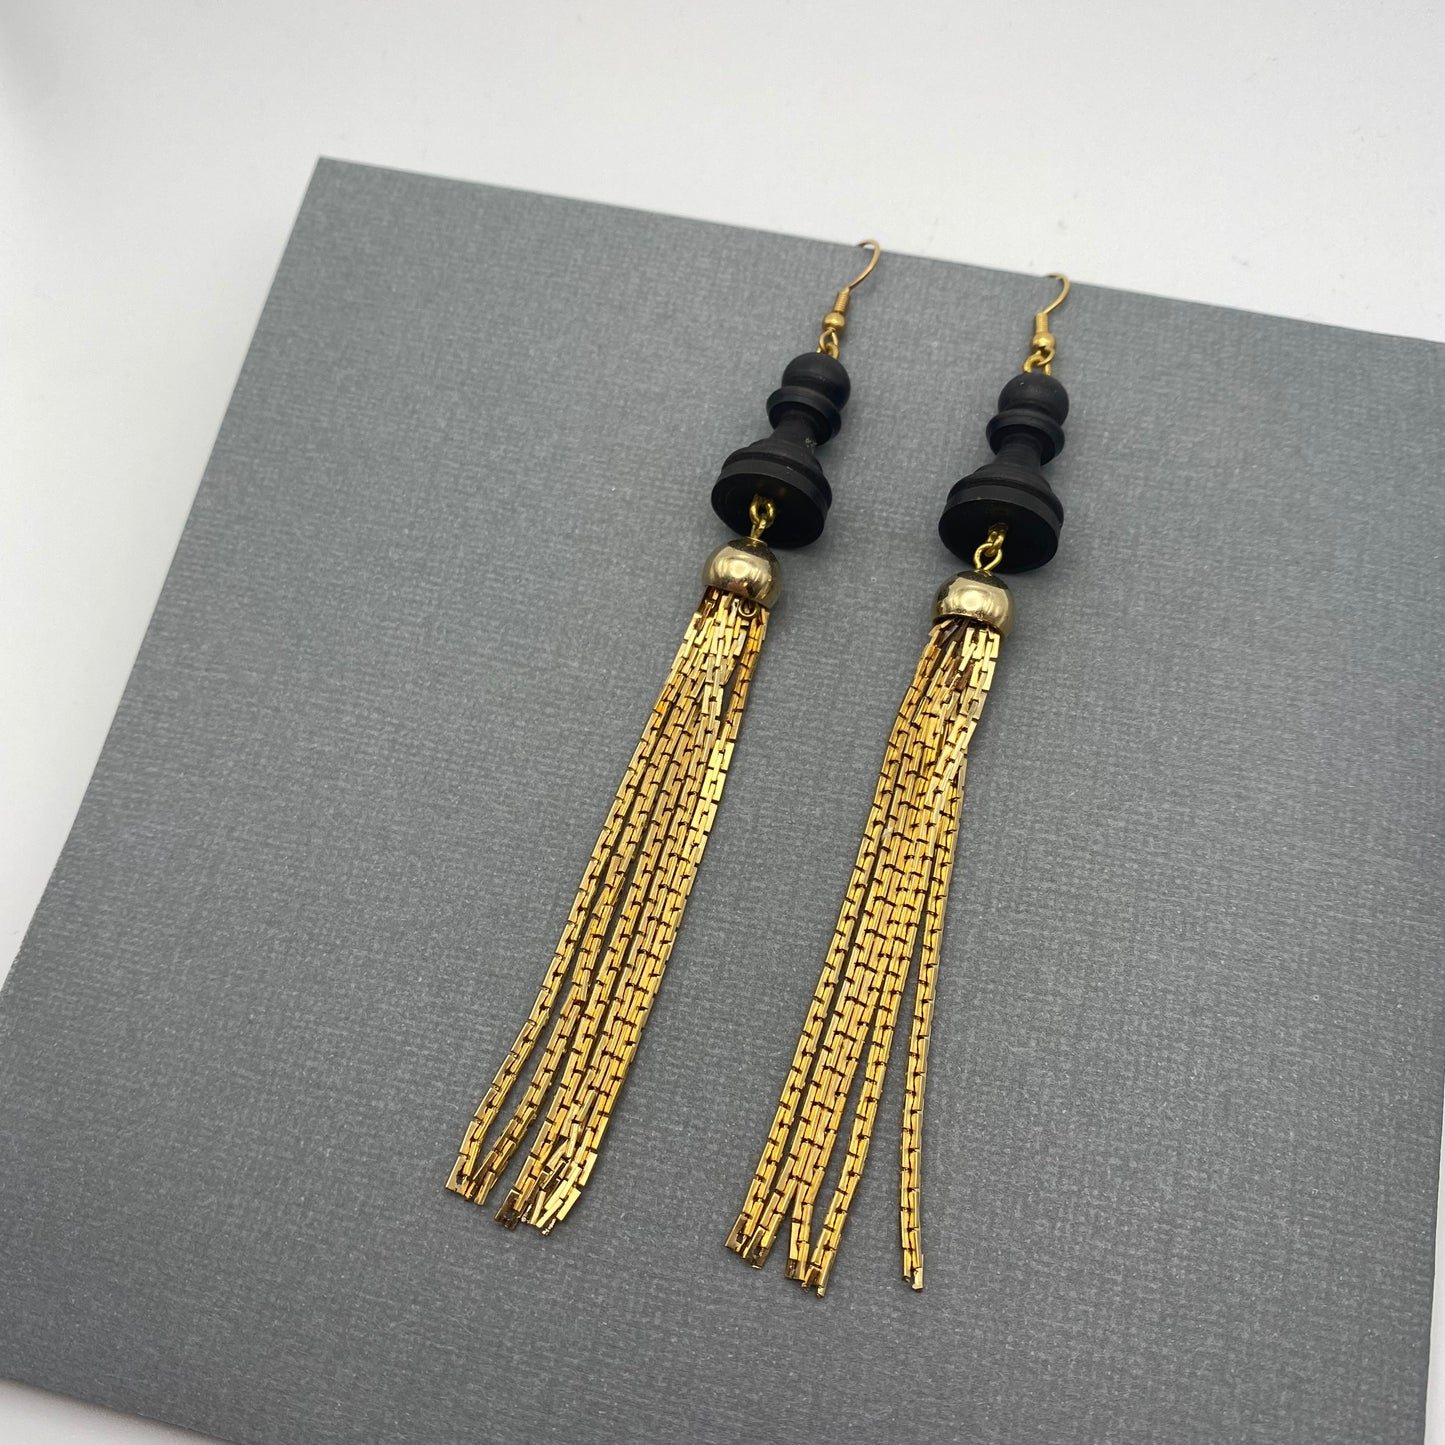 SCHACH PARTY EARRINGS